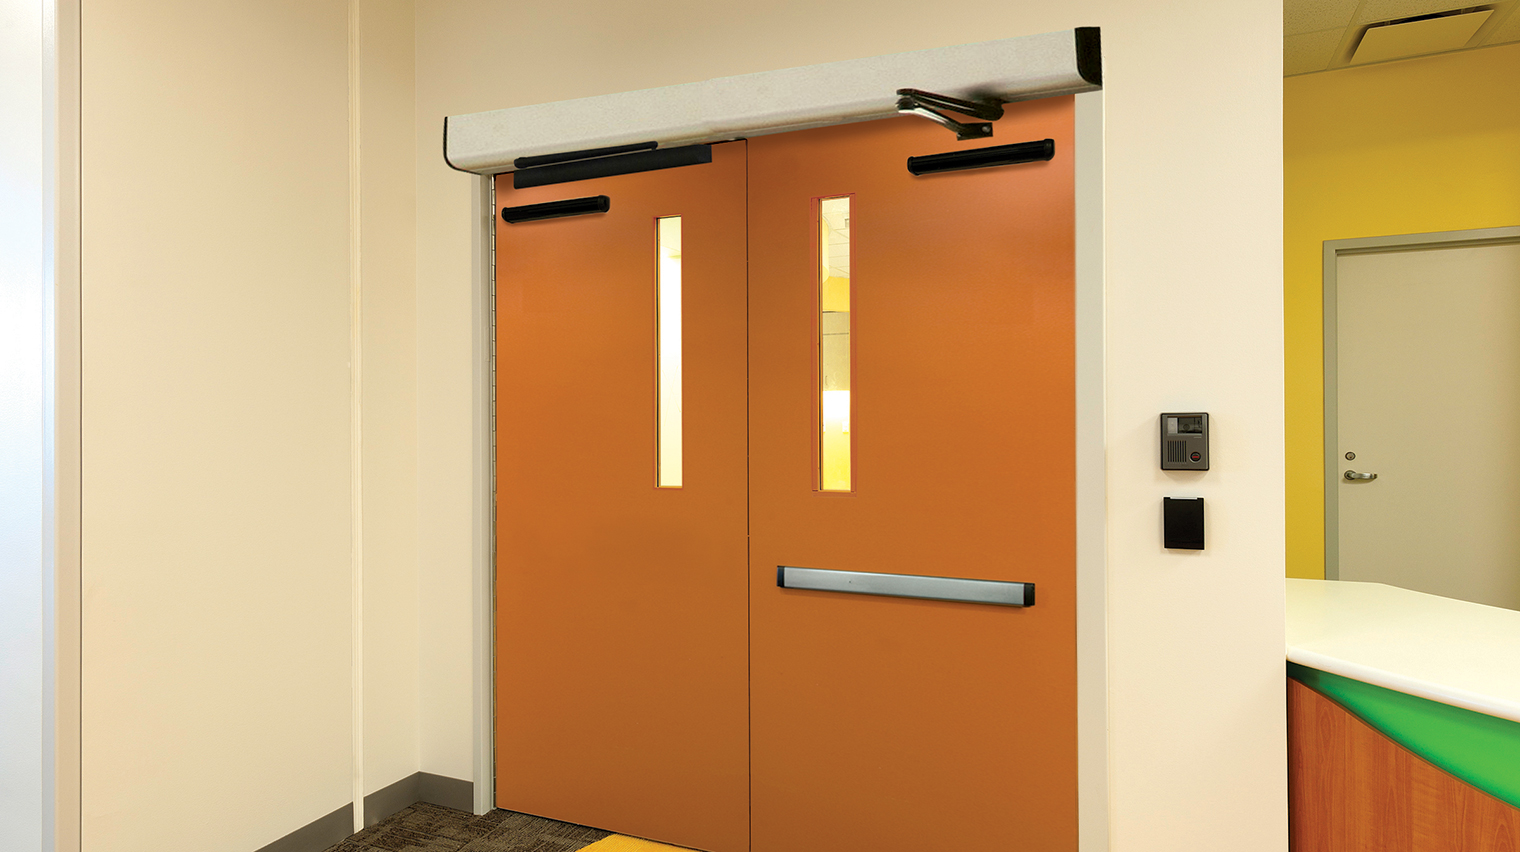 SW200 OHC Swing Door Operator ASSA ABLOY Entrance Systems, 60% OFF